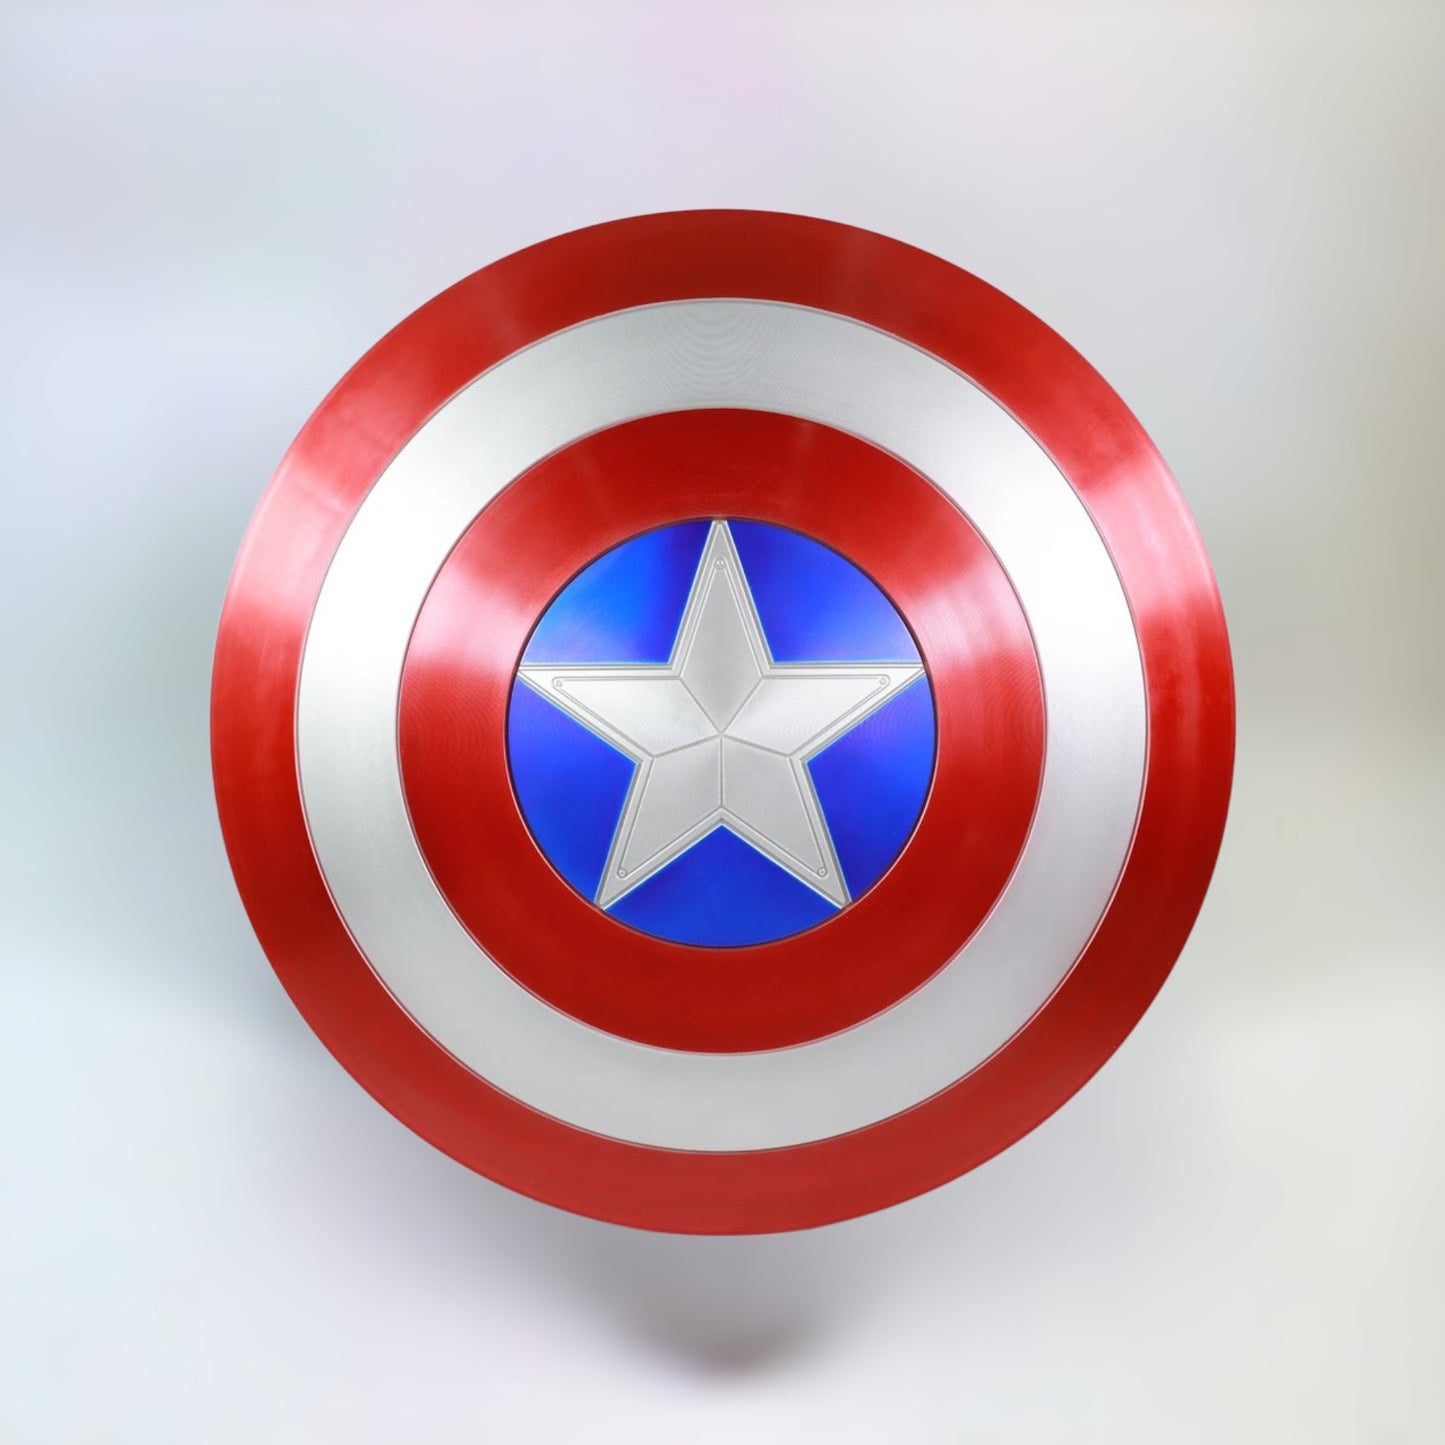 Front view of Captain America's iconic shield made from high-quality plastic on a plain white background.